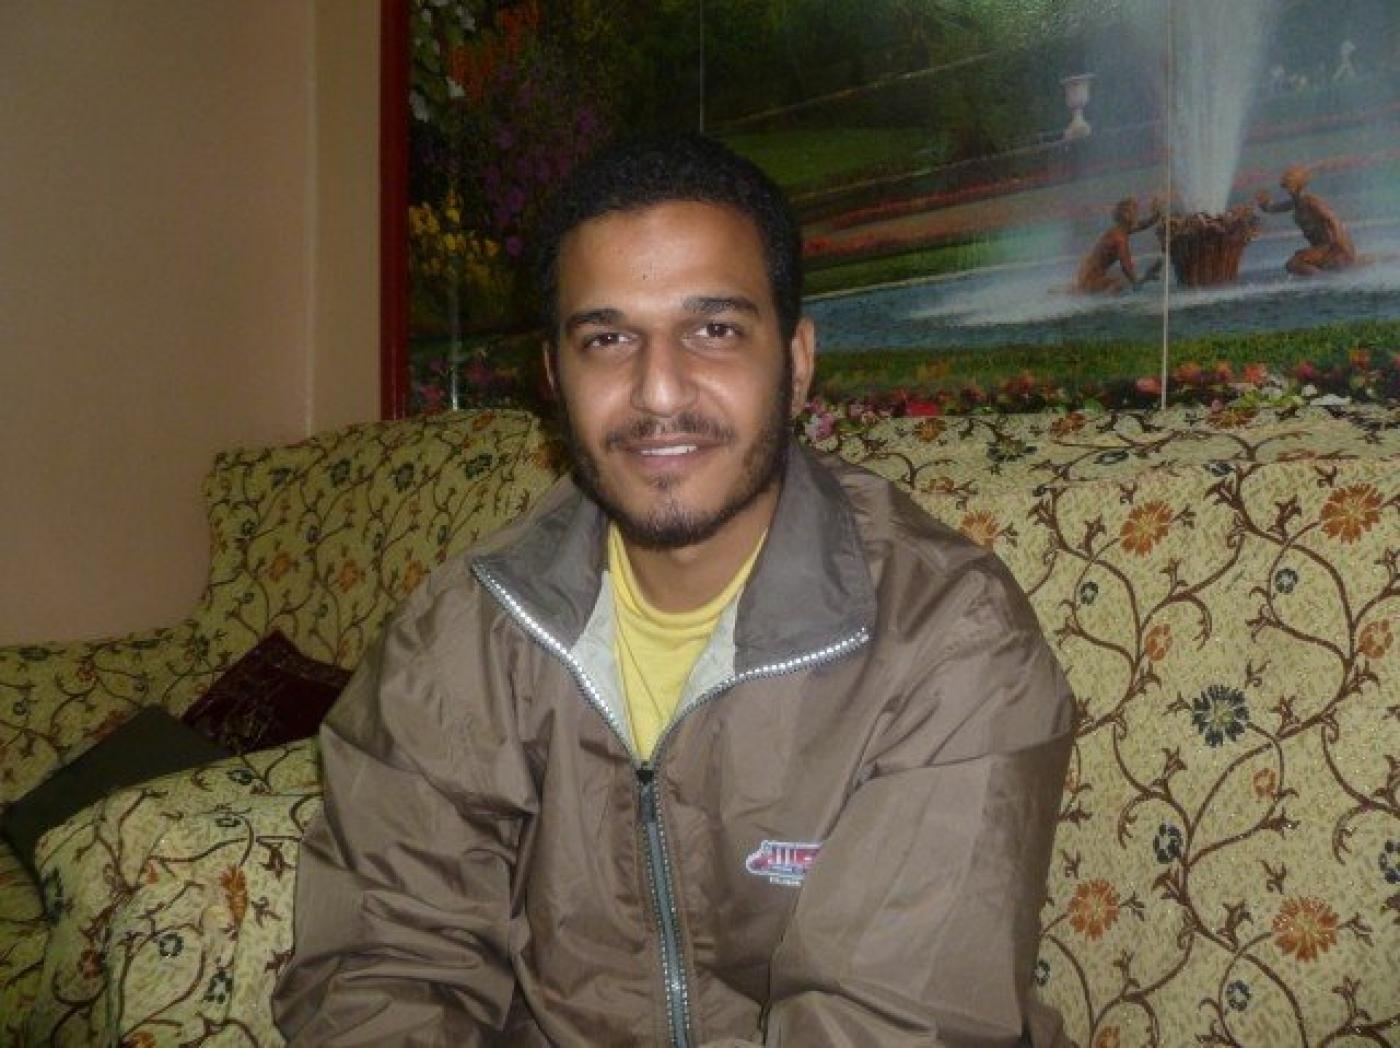 Ramy Kamel is a prominent Coptic Christian activist and founder of the rights group Maspero Youth Union